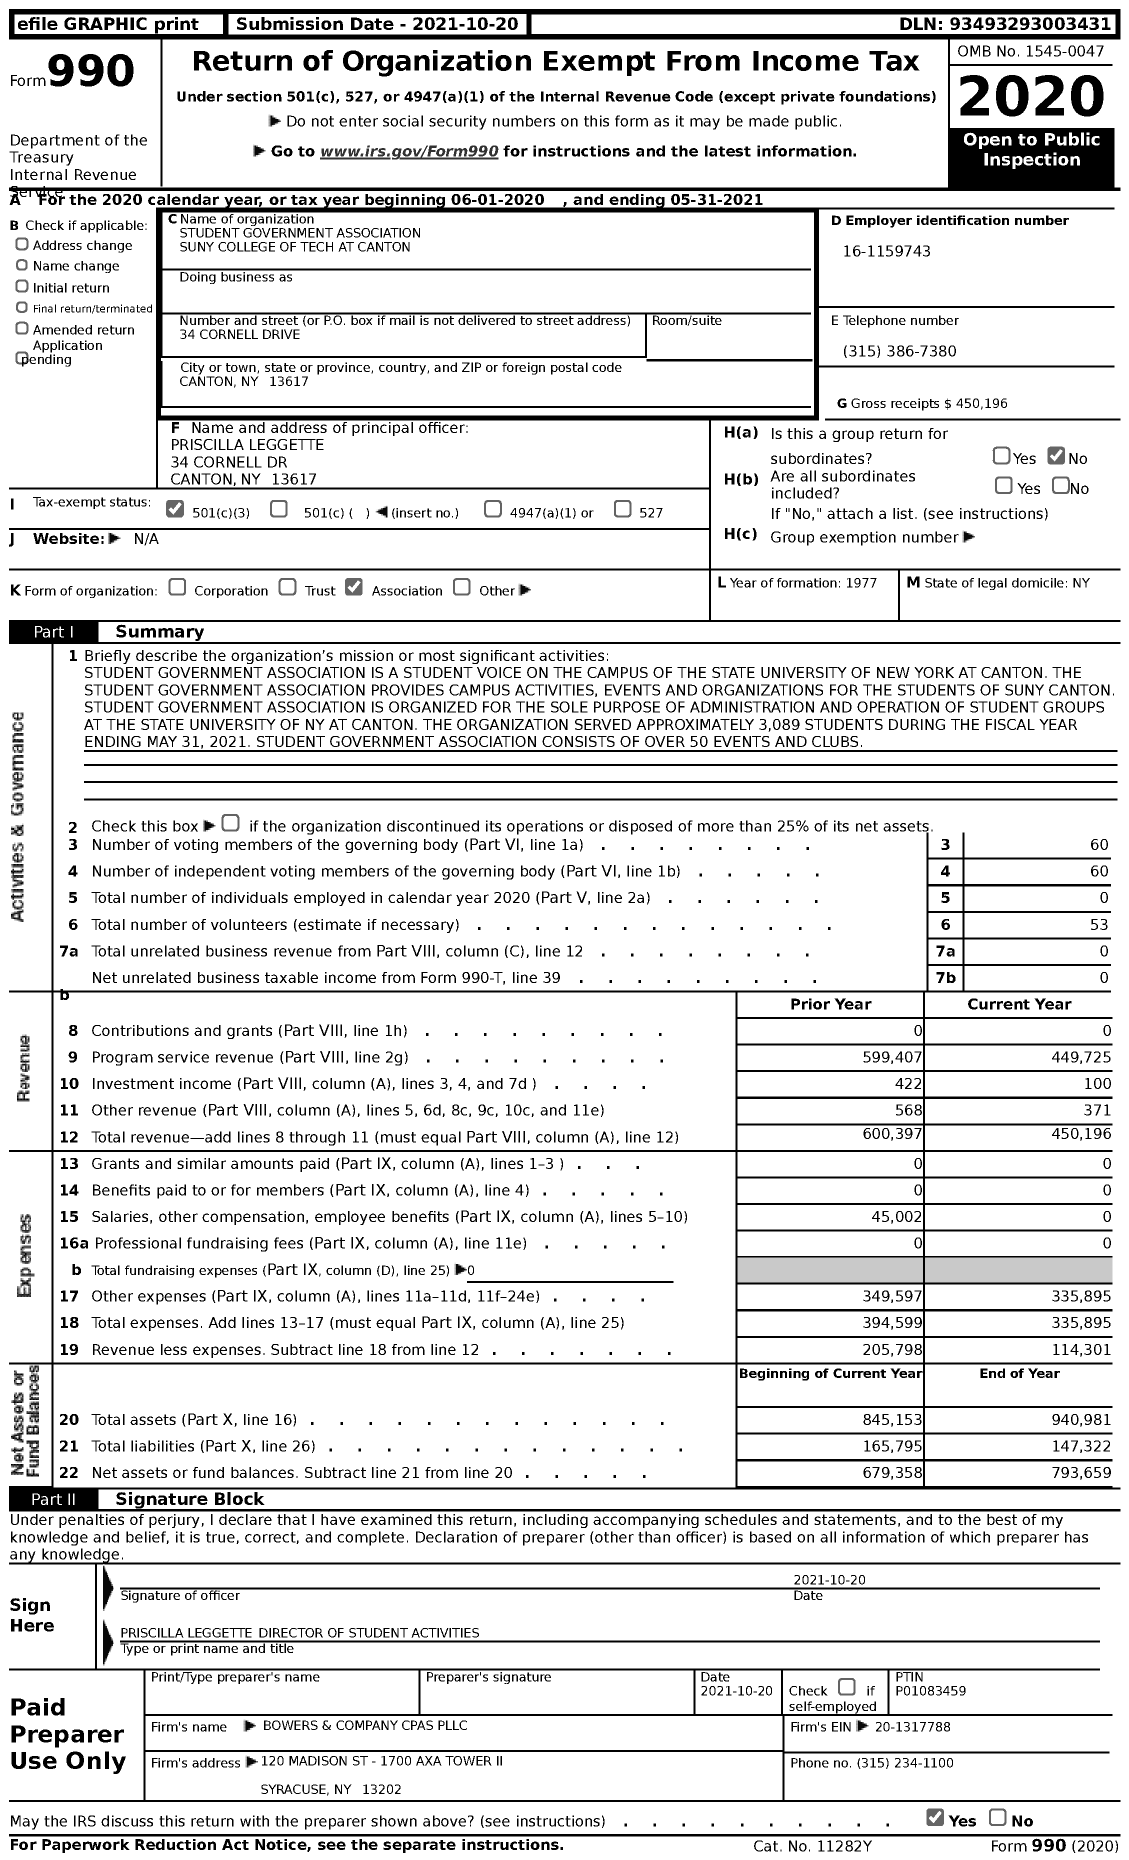 Image of first page of 2020 Form 990 for Student Government Association Suny College of Tech at Canton